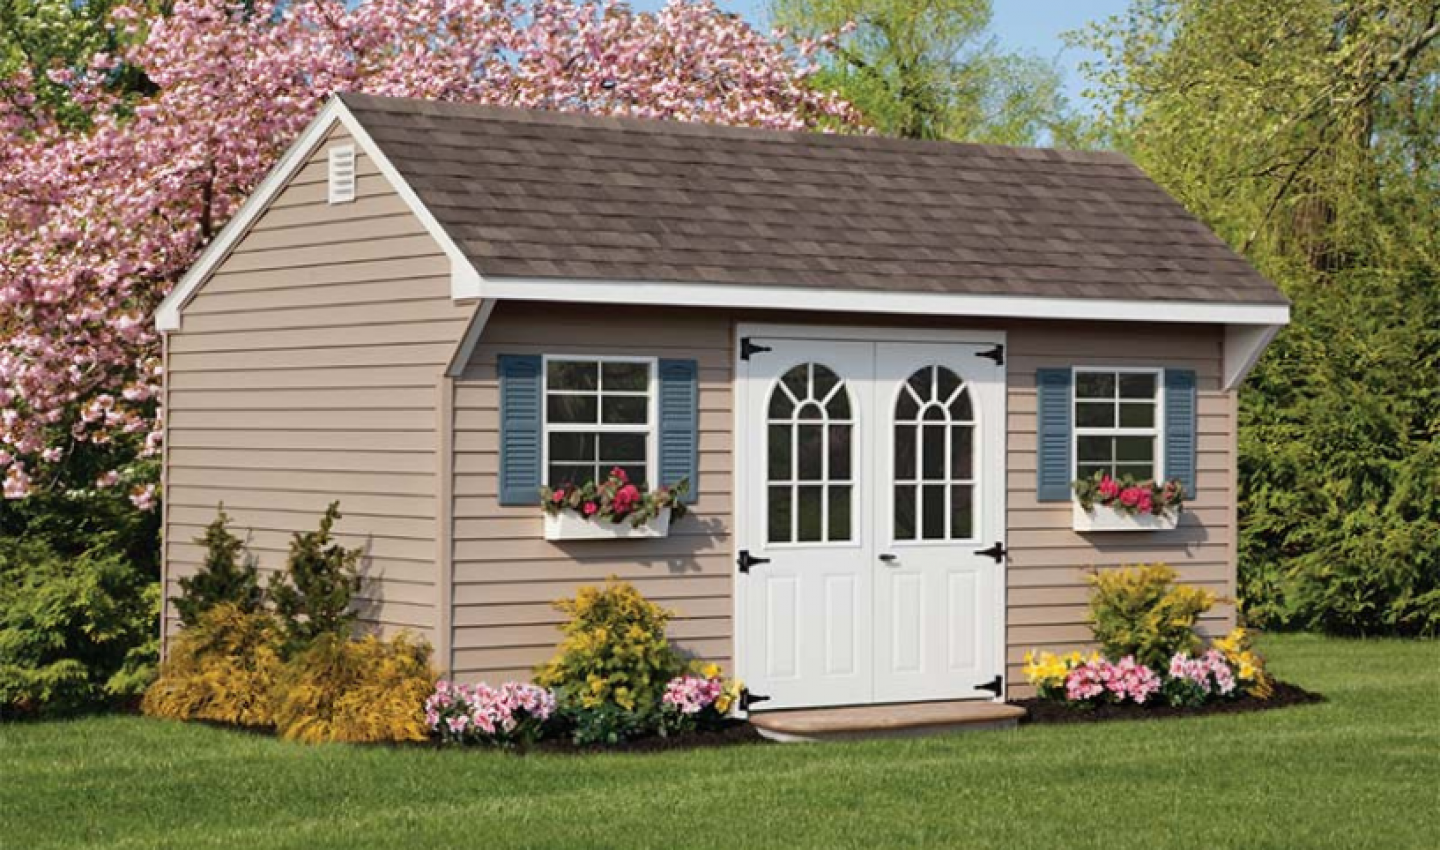 Sheds for Sale in Ocean County